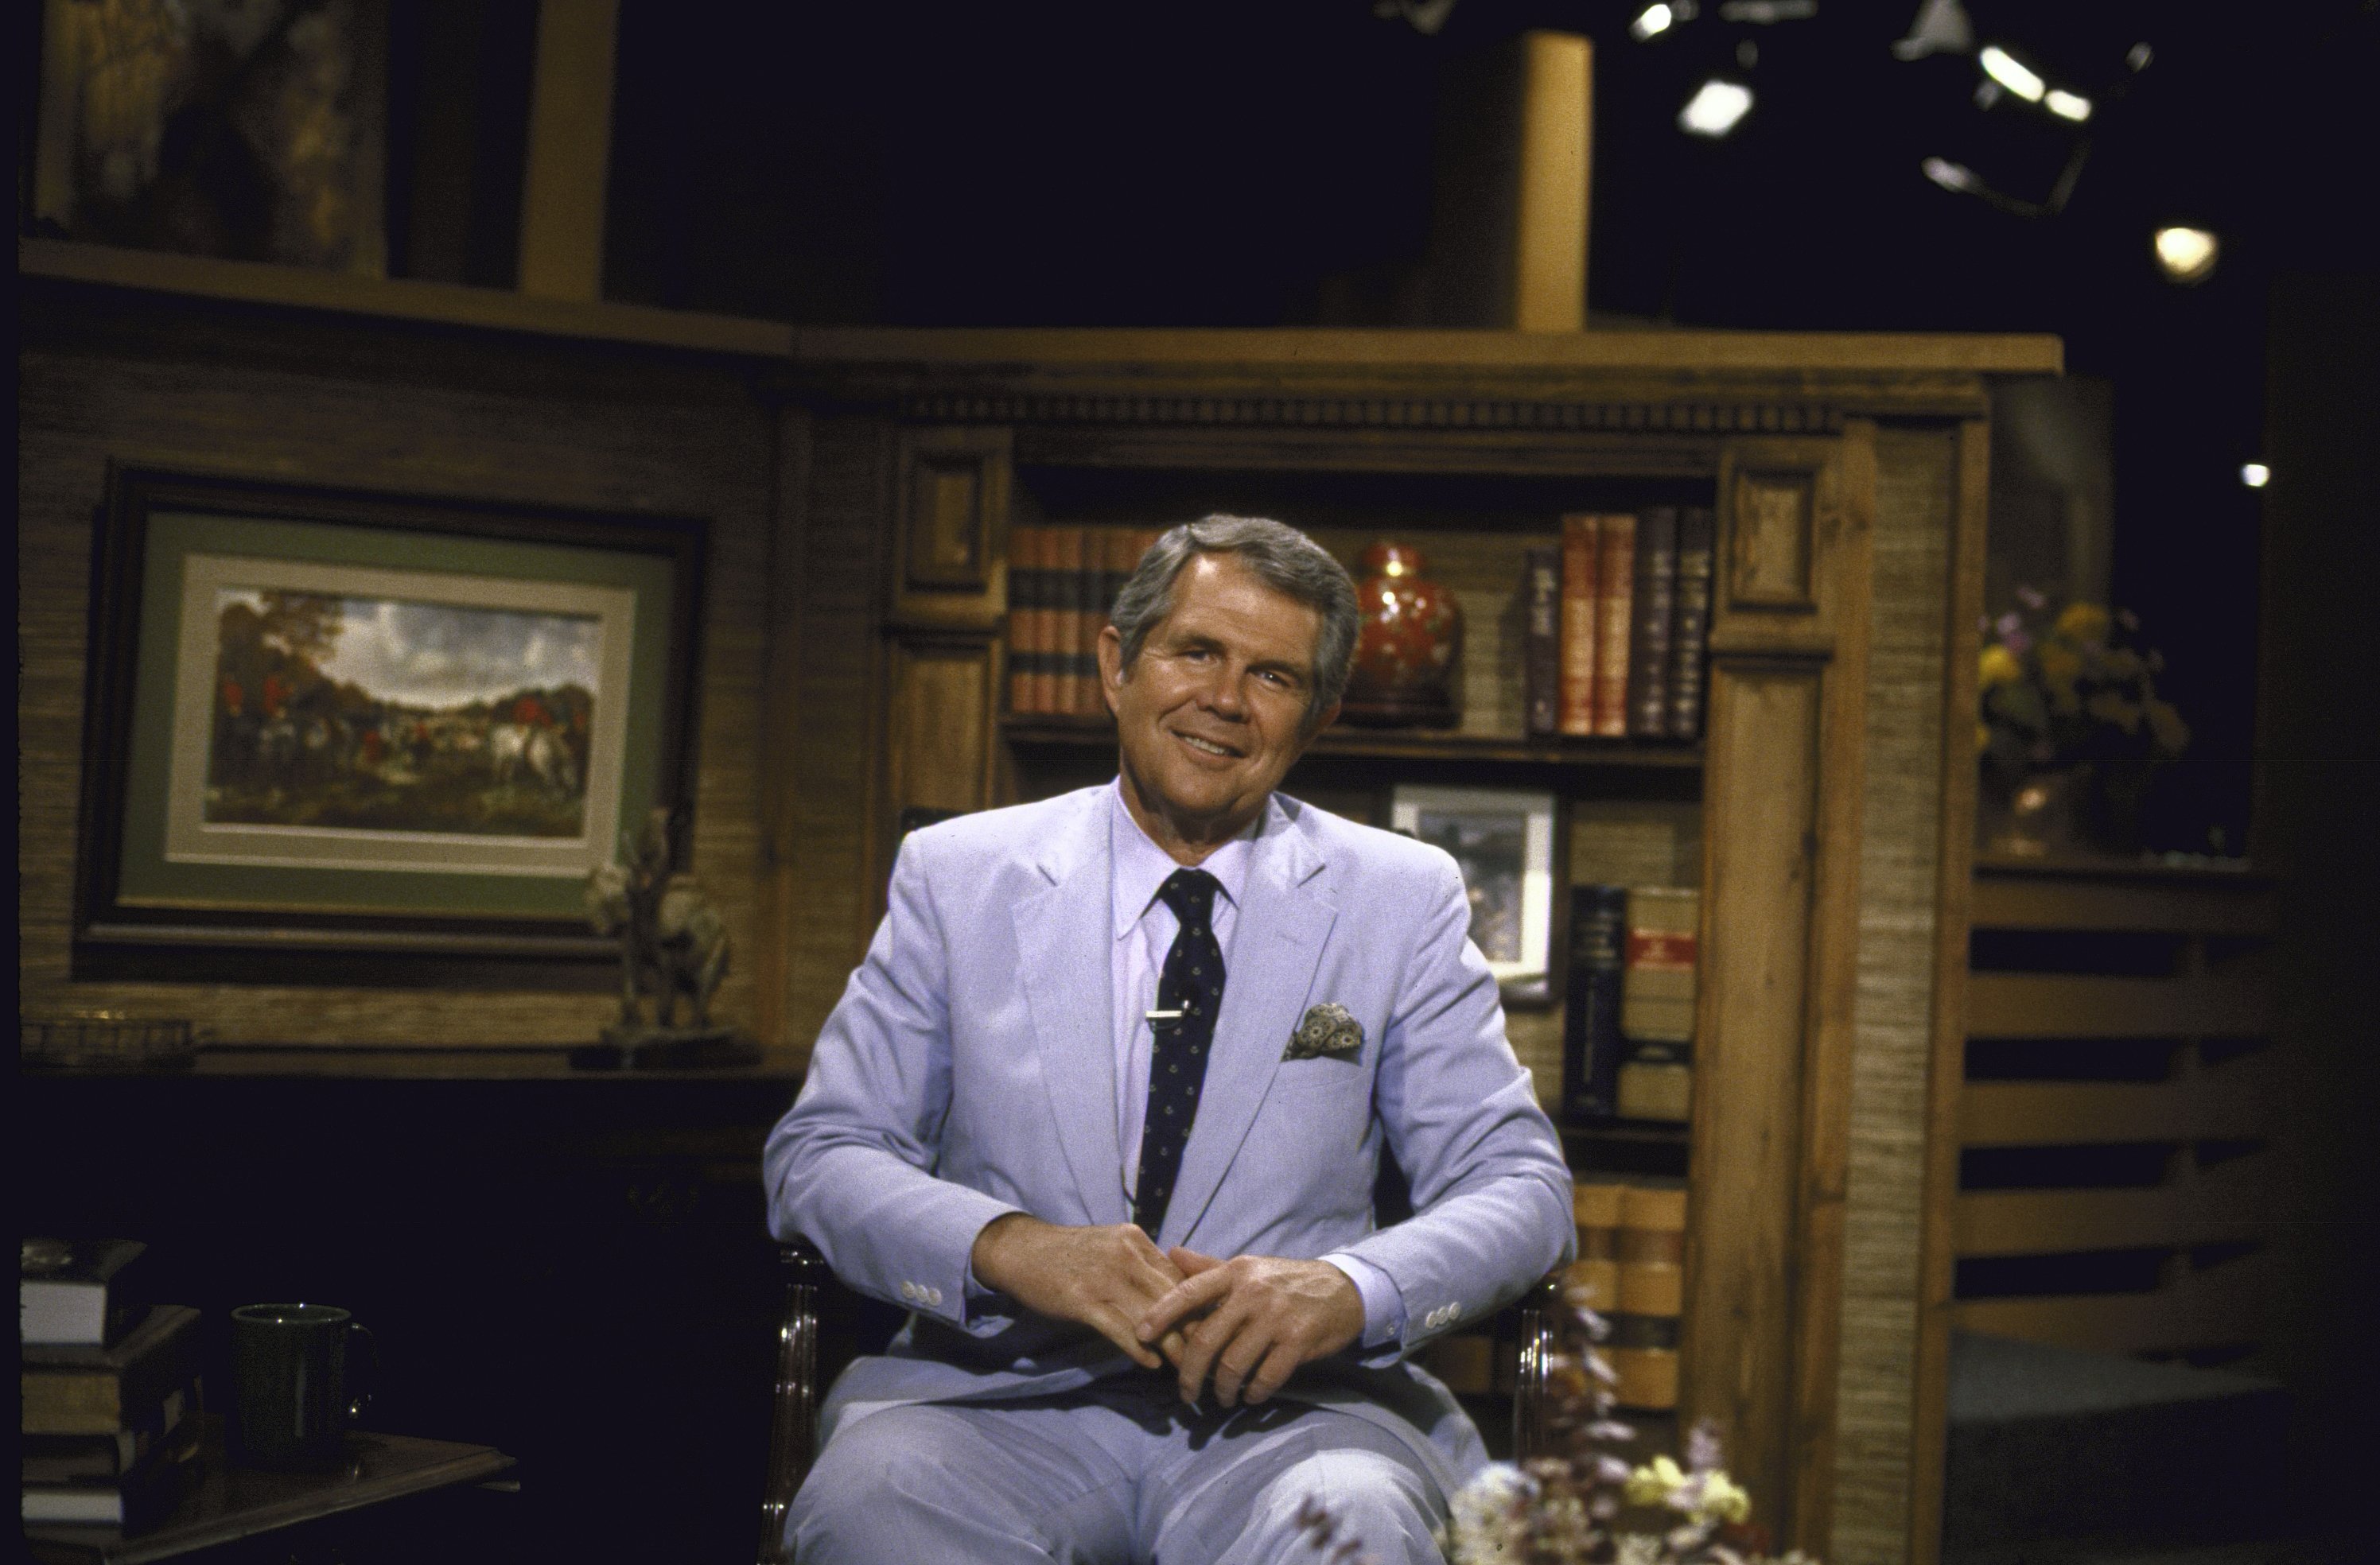 Rev. Pat Robertson on the set of the Christian Broadcasting Network. | Photo by Marty Katz/The LIFE Images Collection via Getty Images